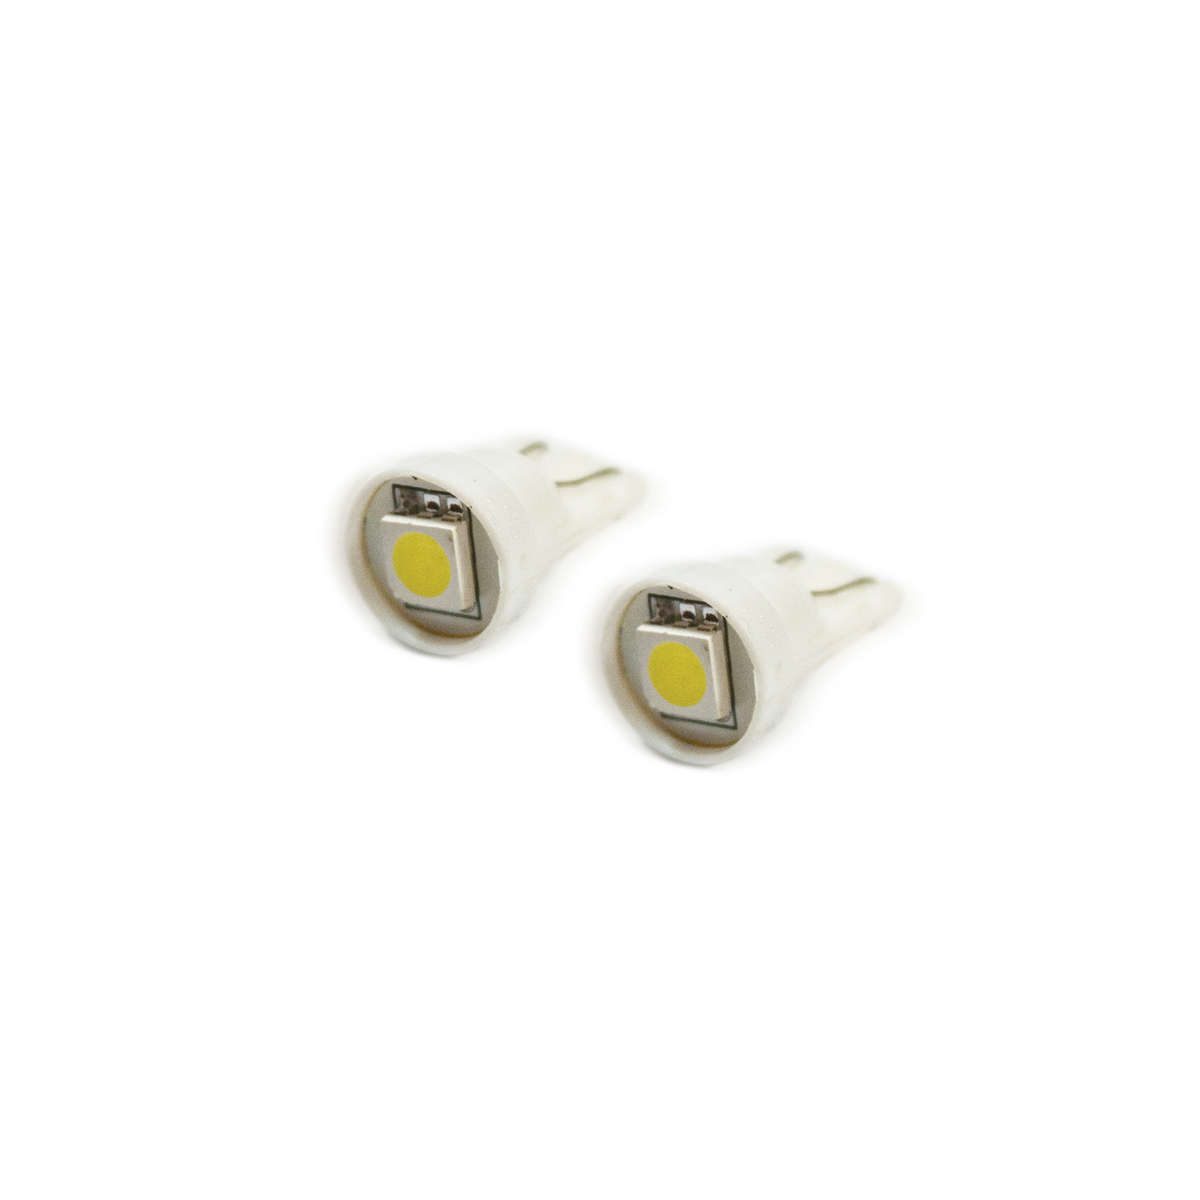 ORACLE LIGHTING T10 1 LED 3-Chip SMD Bulbs Pair Cool White